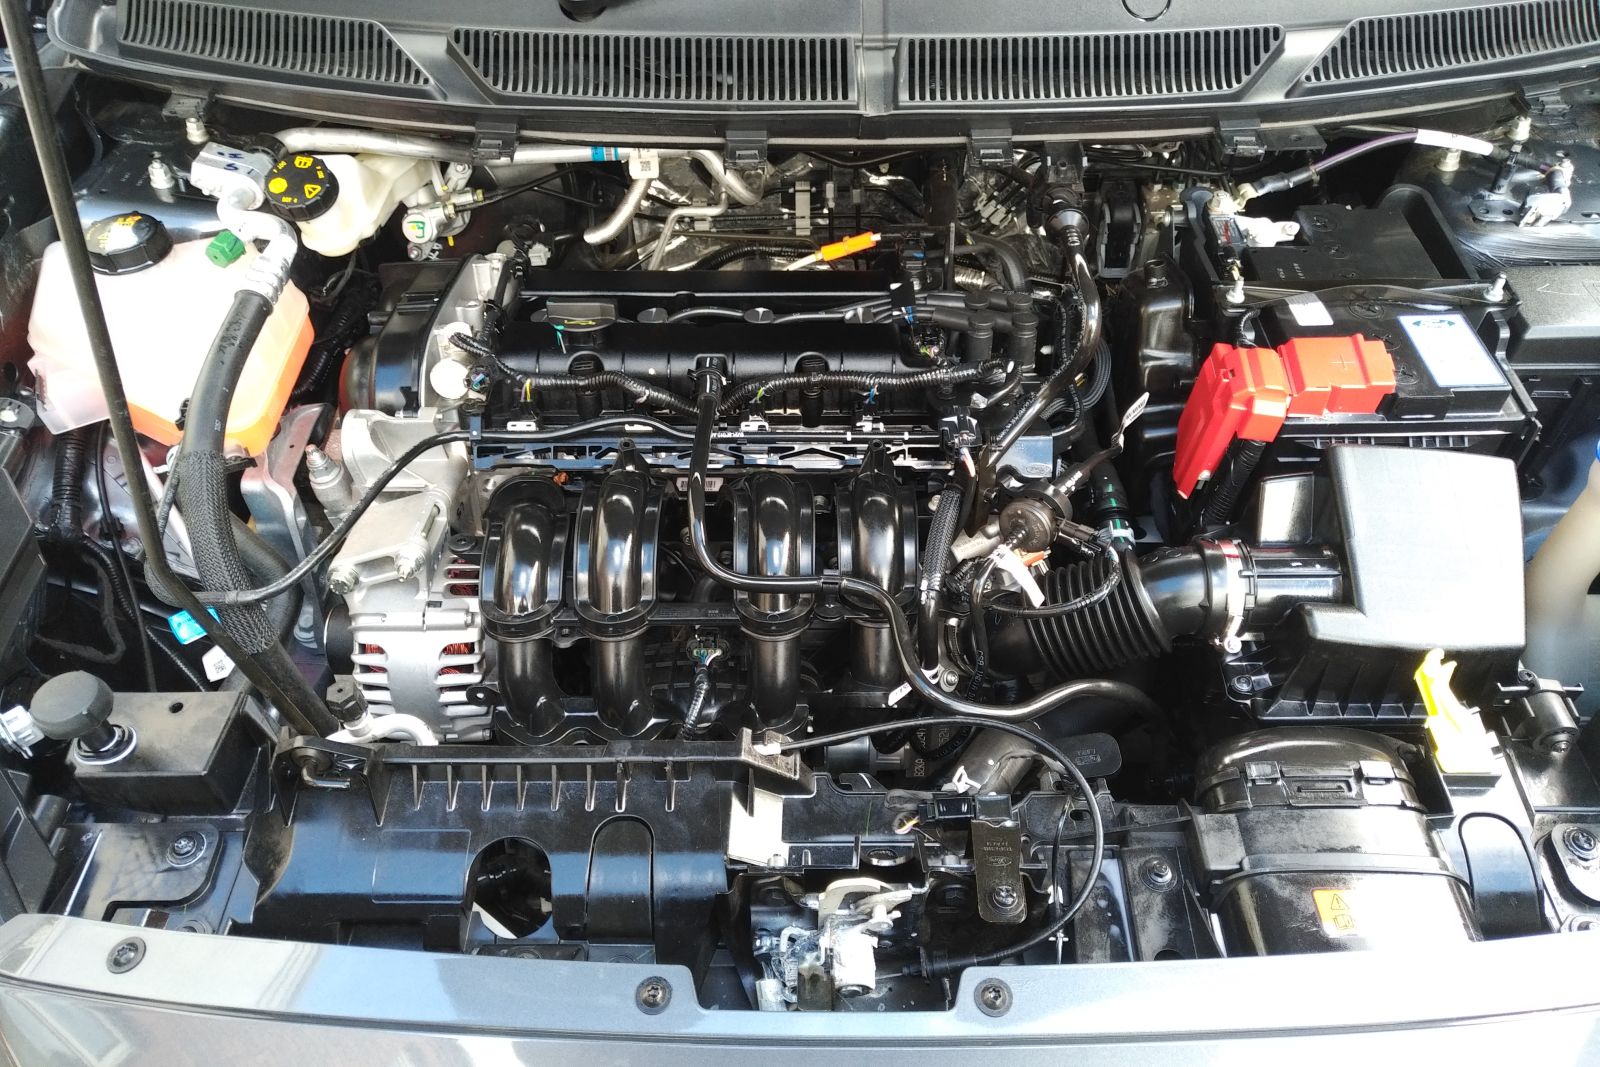 Engine bay, even though the car had only covered 580 miles was filthy, thoroughly cleaned with AutoBrite Jaffa Clean, brush and plenty of cloths 